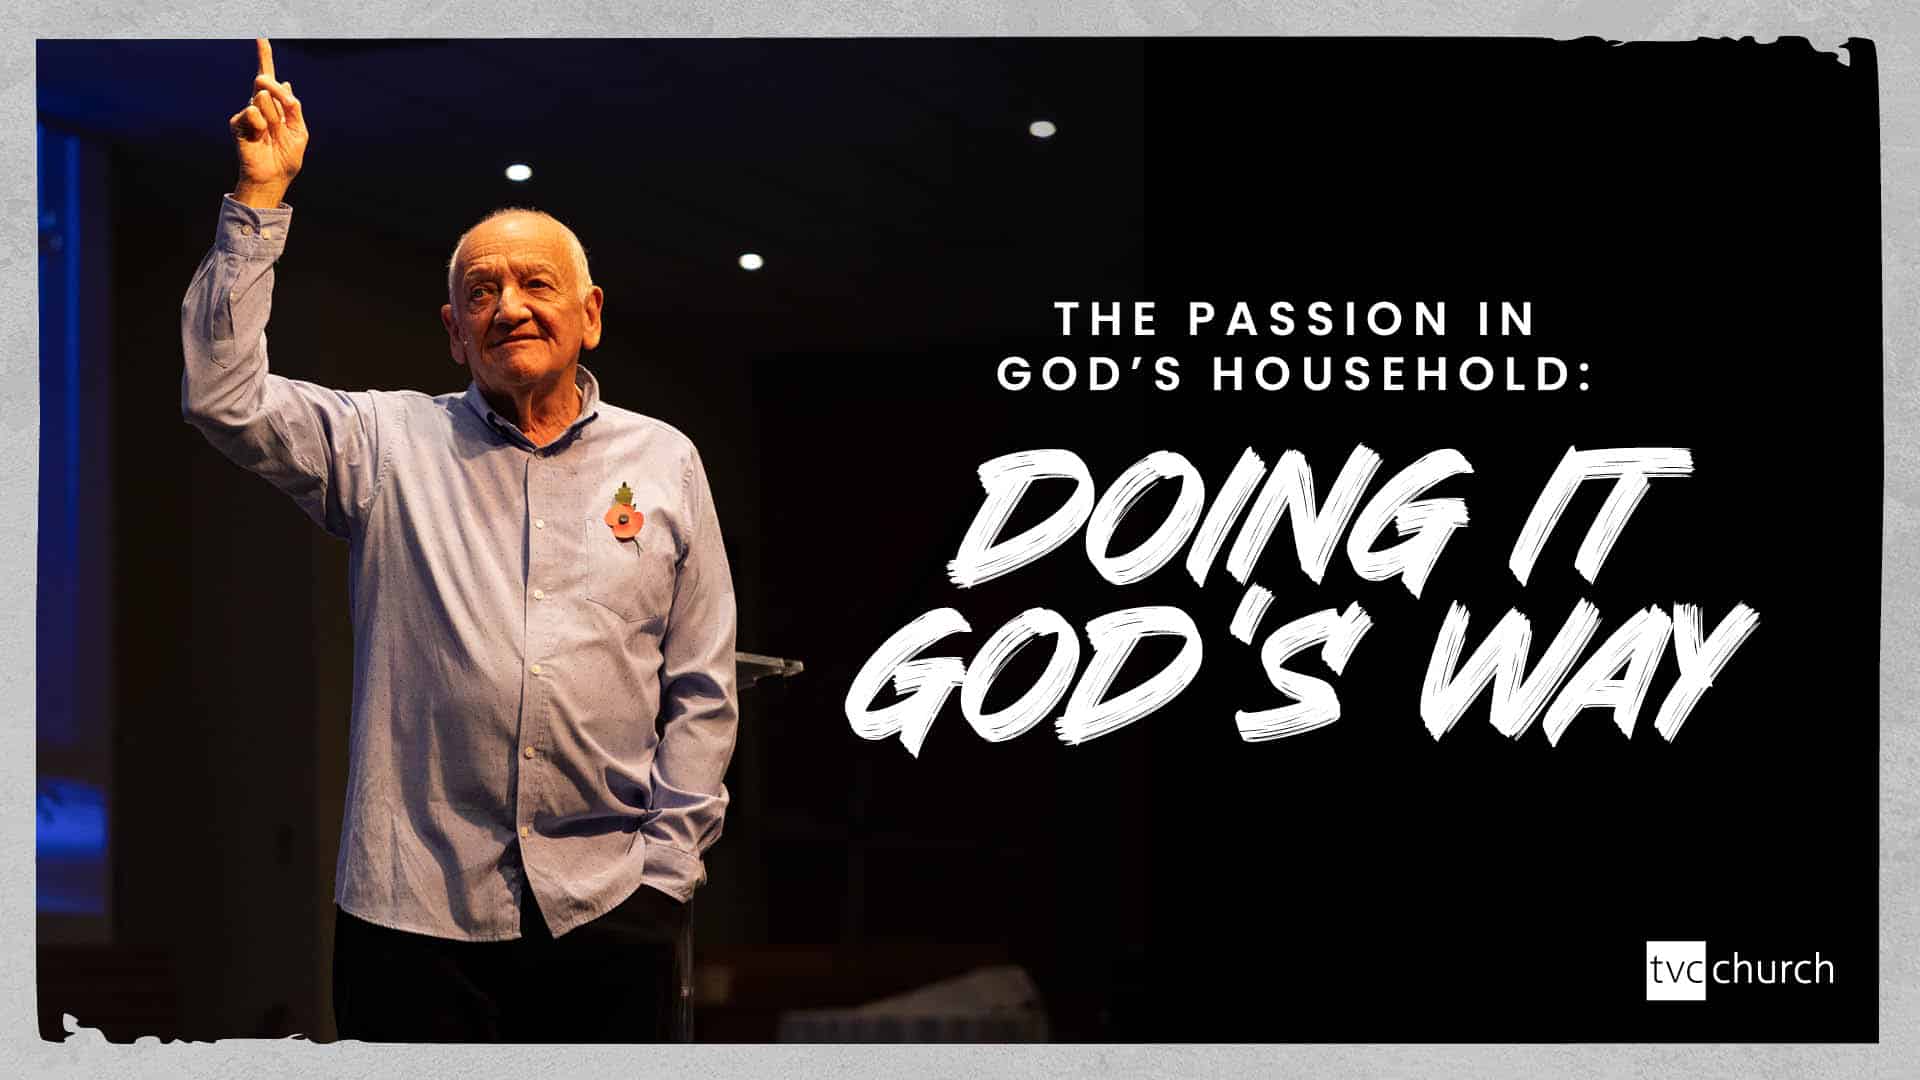 The Passion in God’s Household: Doing it God’s Way